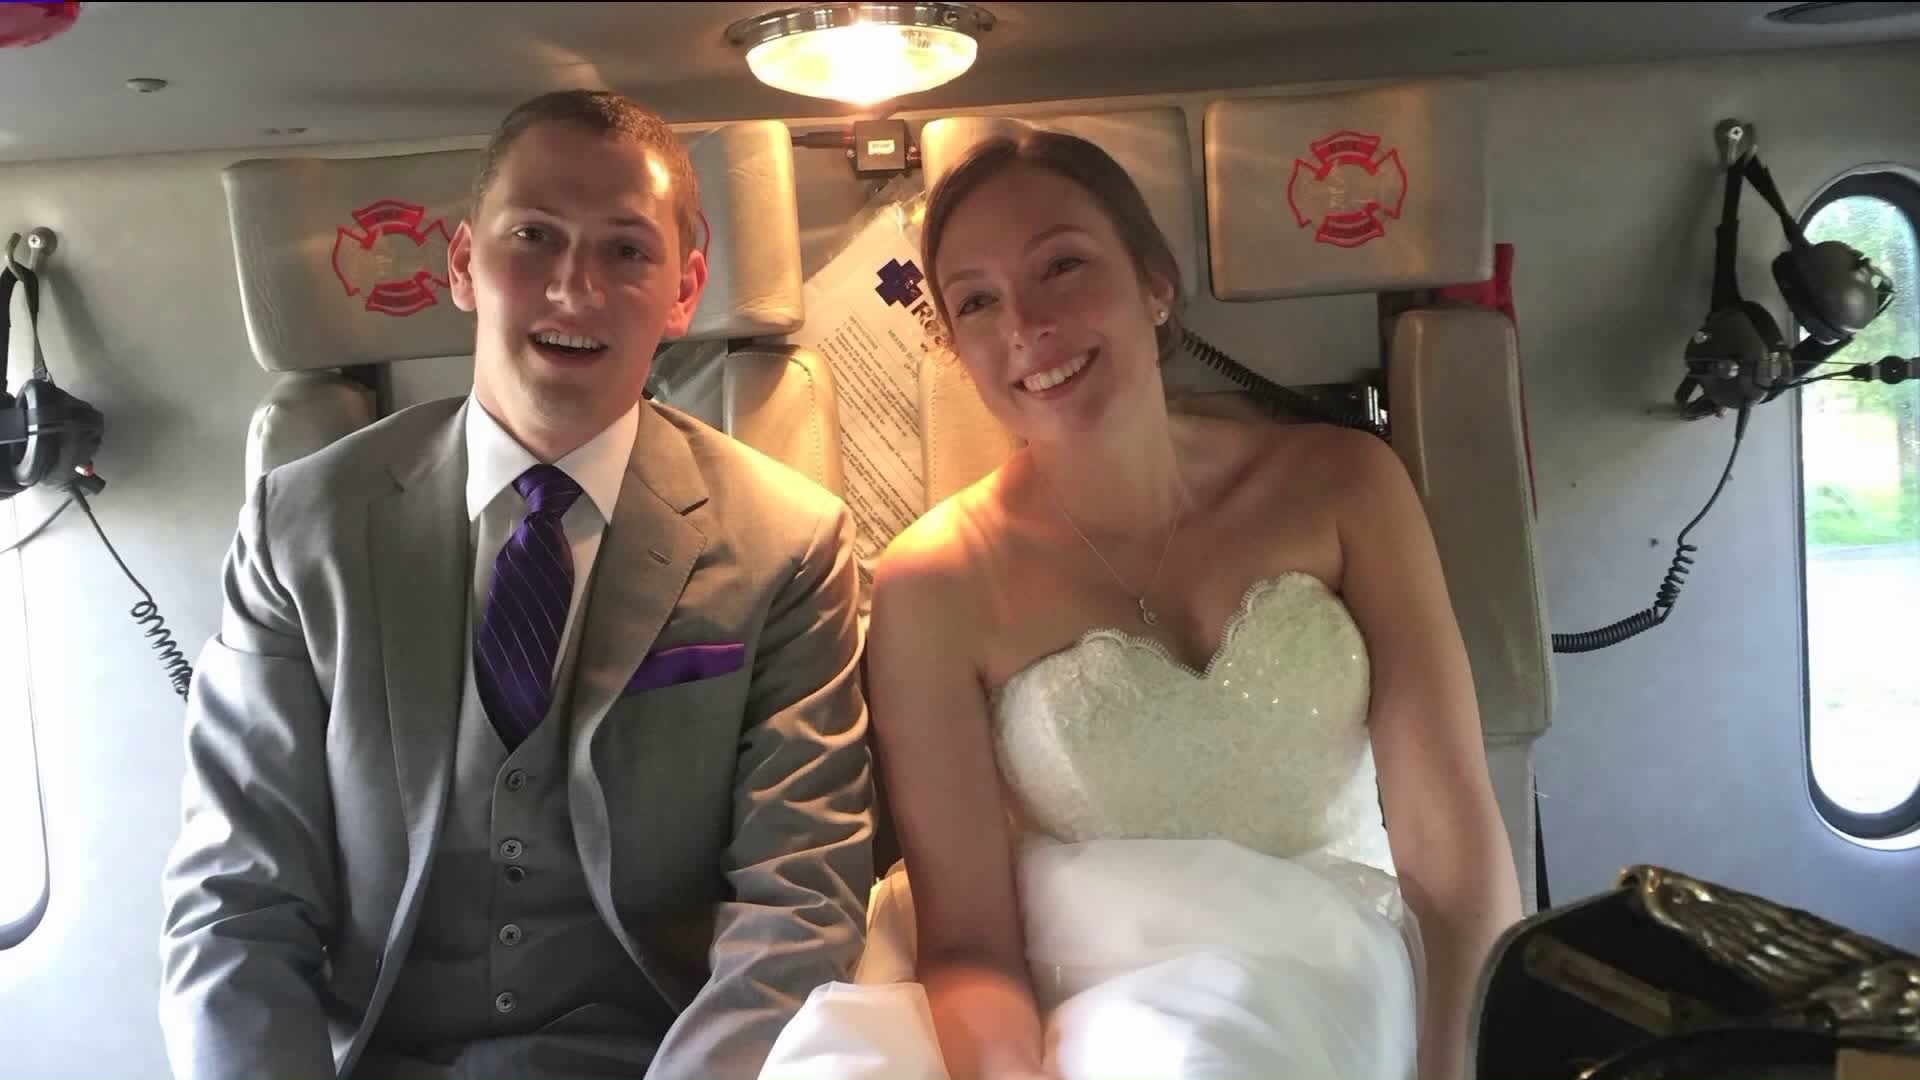 Wedding couple gets sweet ride to church